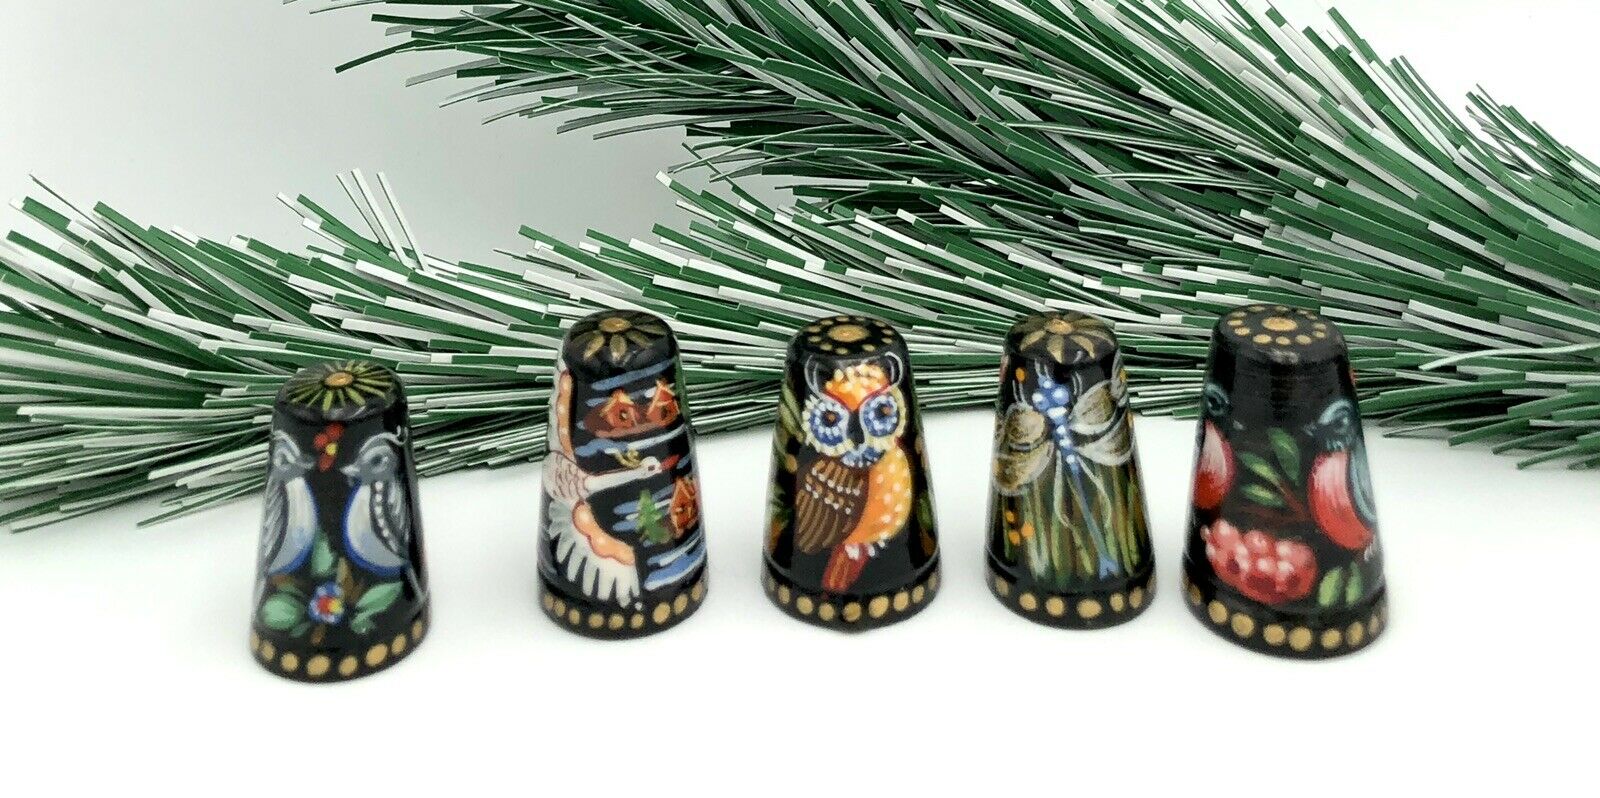 Collectible Handmade Thimbles, Set With 5, Wood, Hand Painted, Owl, Swan, Birds